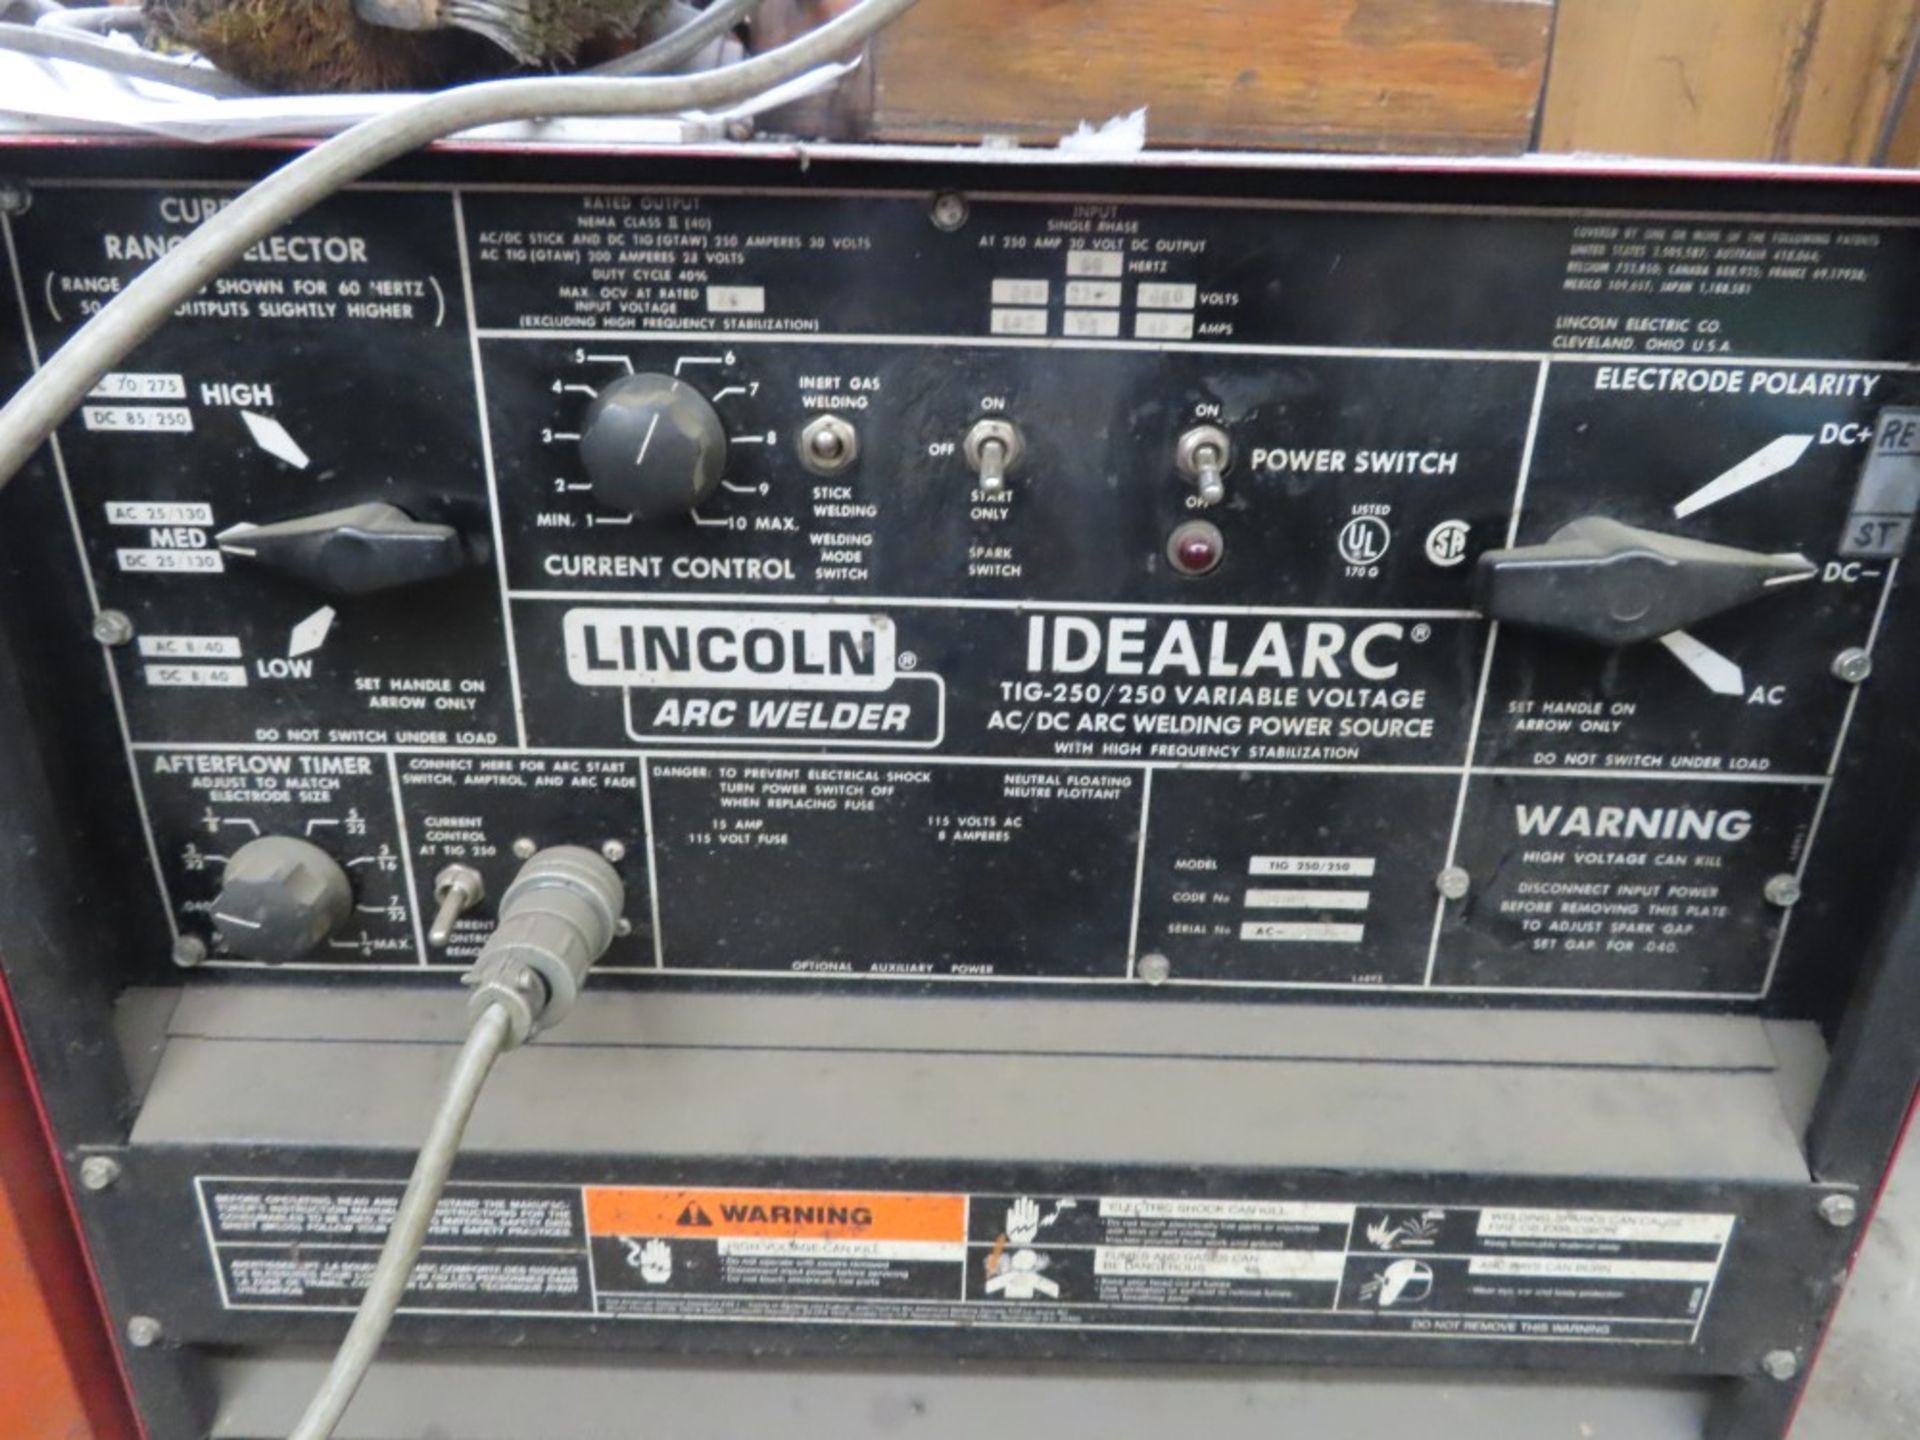 LINCOLN IDEALARC TIG 250/2500 VARIABLE VOLTAGE AC/DC ARC WELDING POWER SOURCE - Image 2 of 2